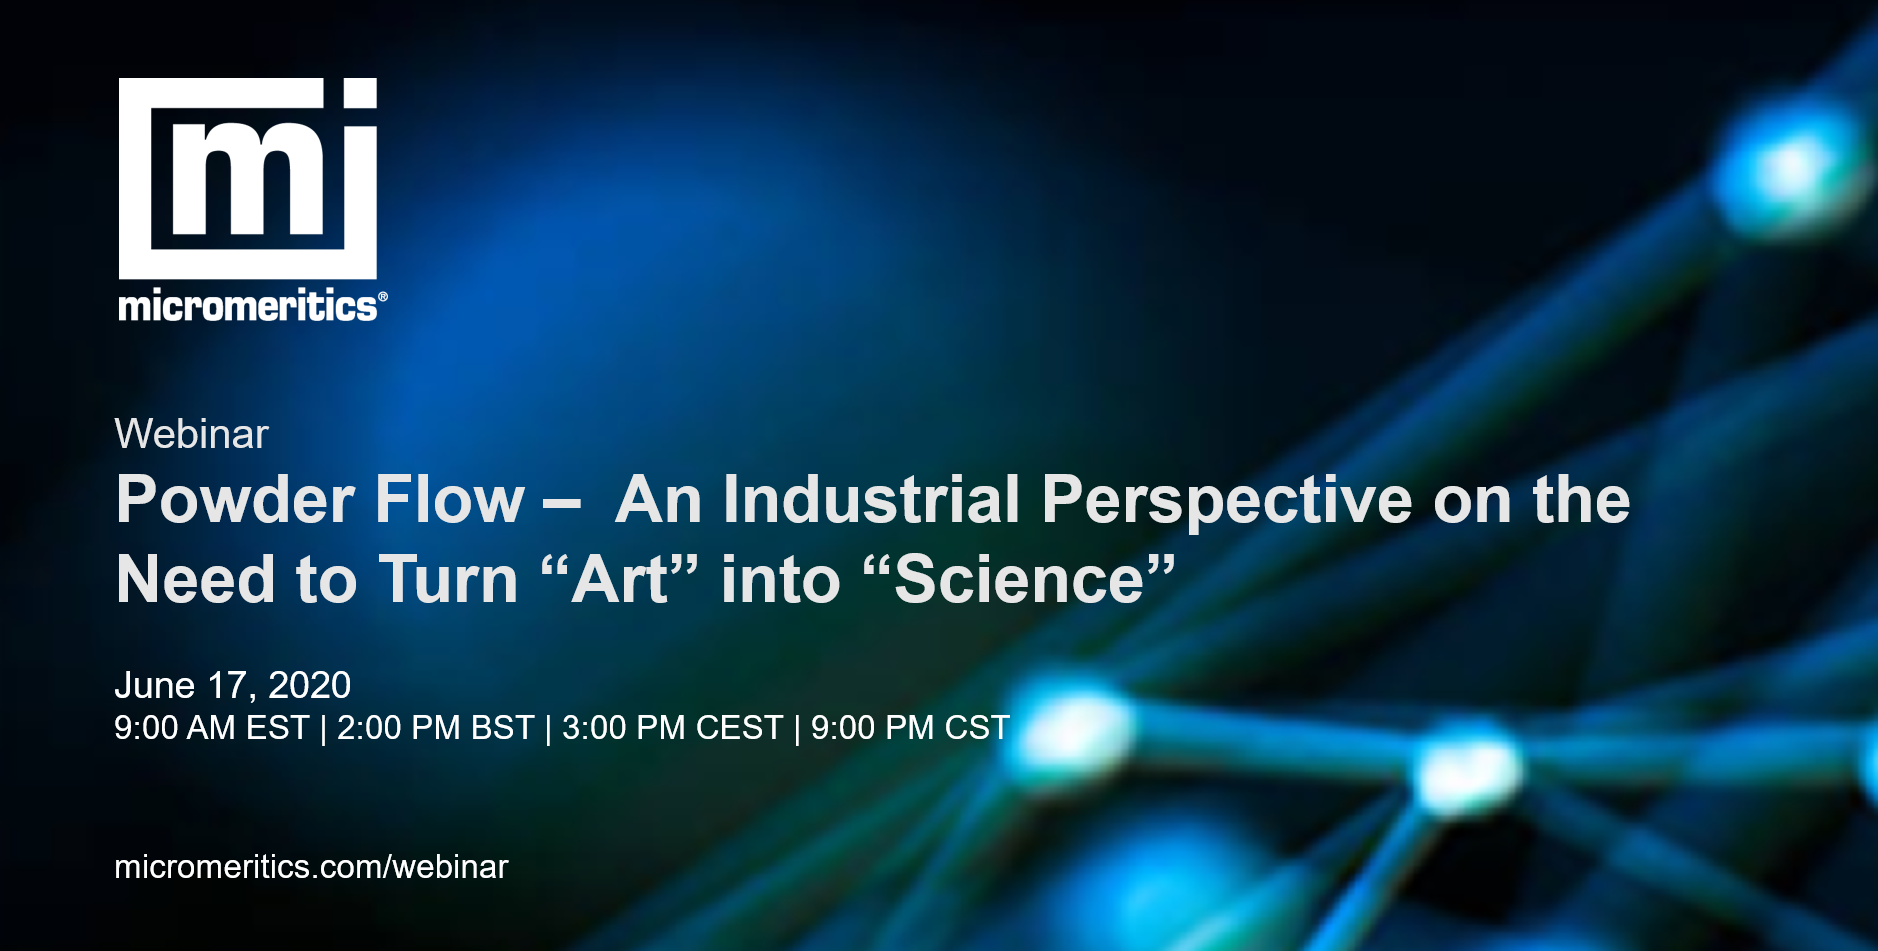 Powder flow webinar - an industrial perspective on the need to turn art into science